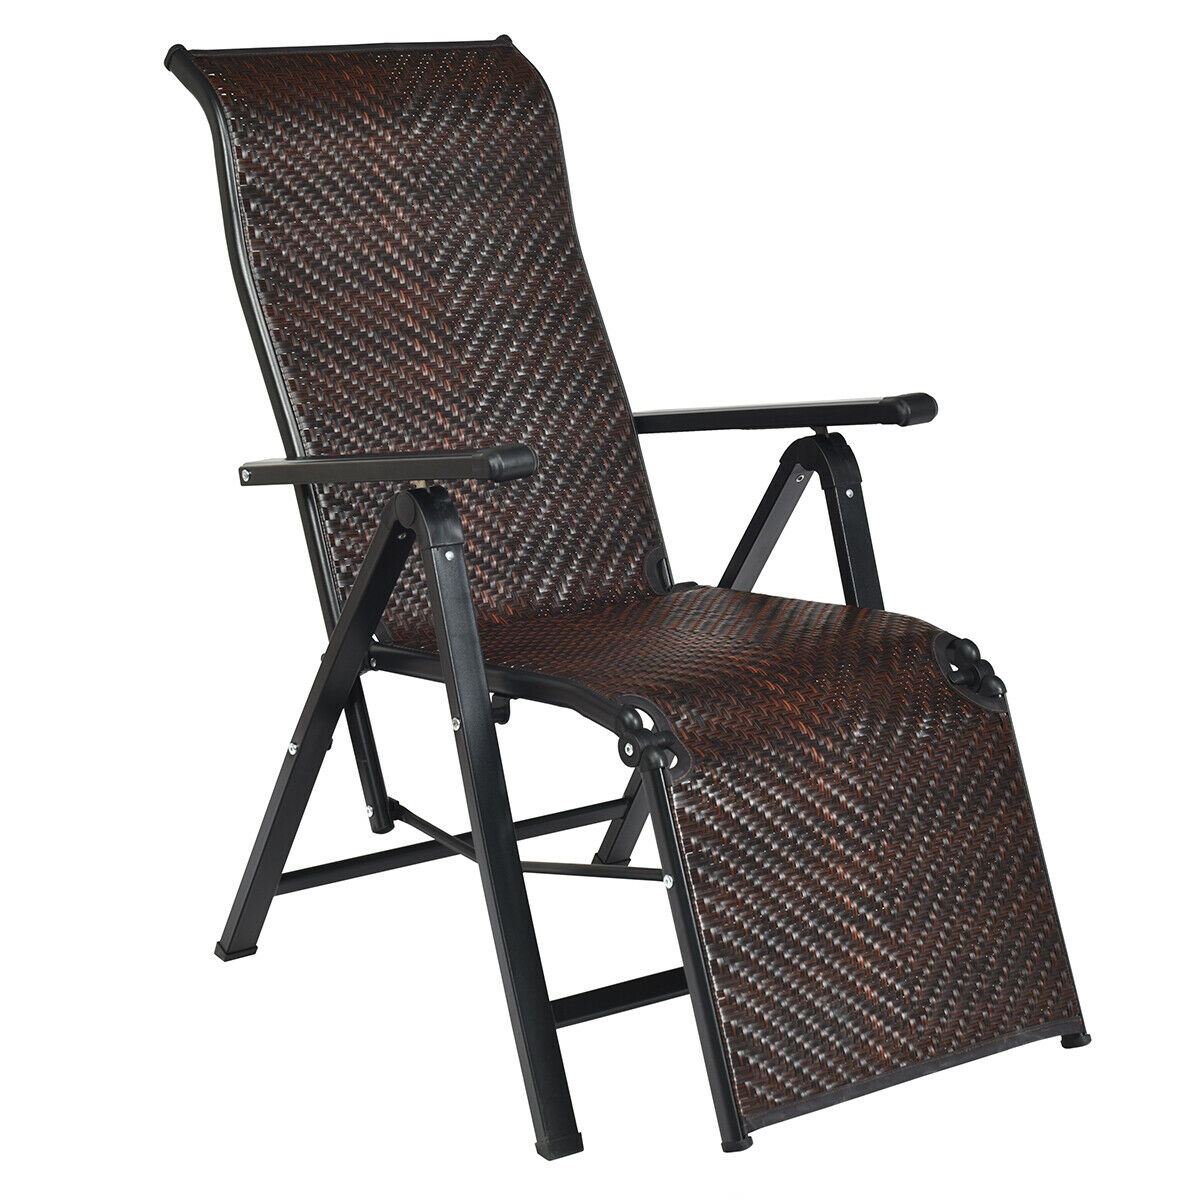 Gymax Patio Rattan Folding Lounge Chair Recliner Back Adjustable Beach Yard Pool - image 4 of 10